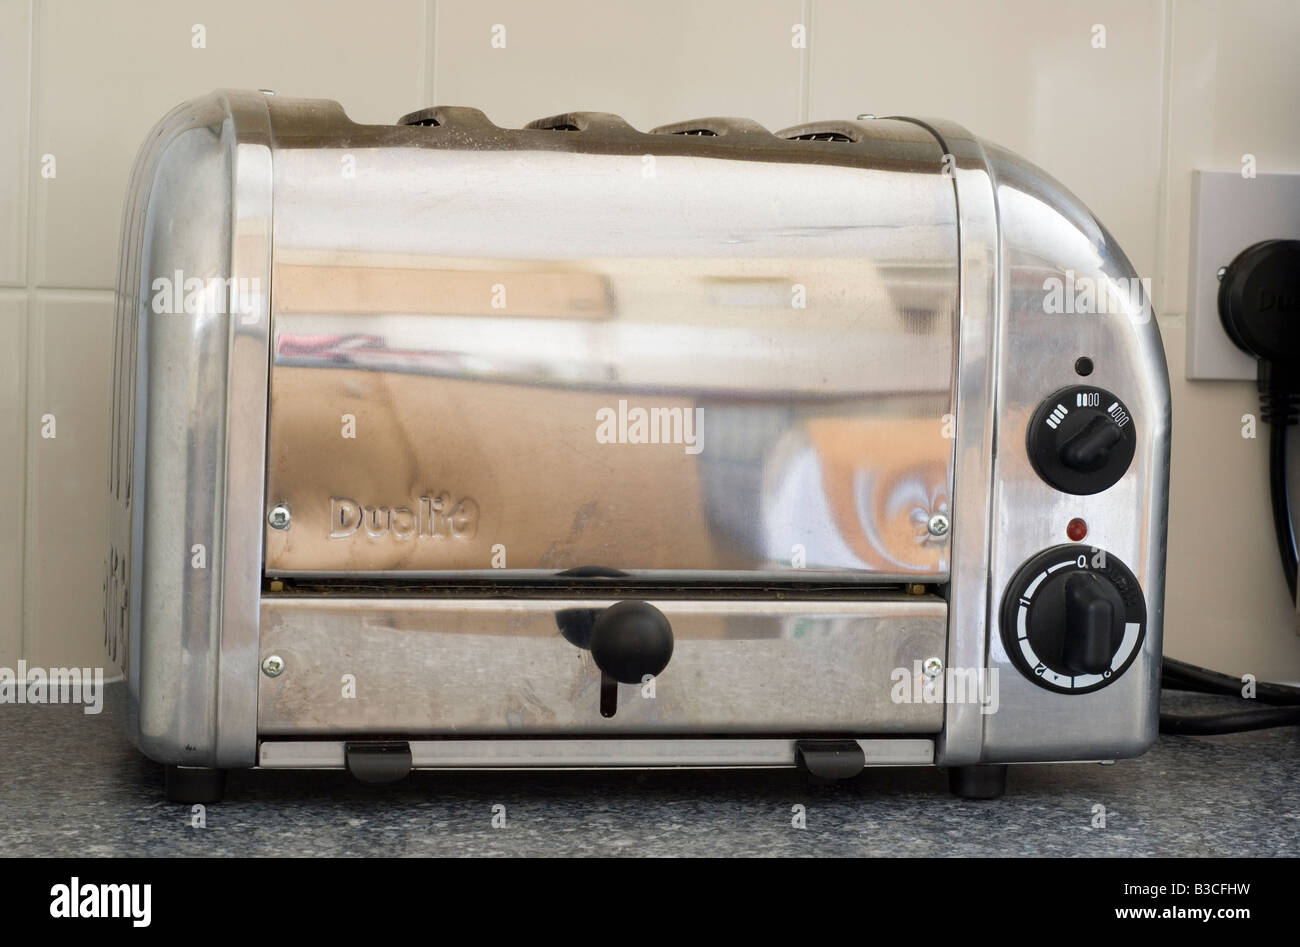 https://c8.alamy.com/comp/B3CFHW/top-quality-dualit-toaster-in-stainless-steel-finish-B3CFHW.jpg